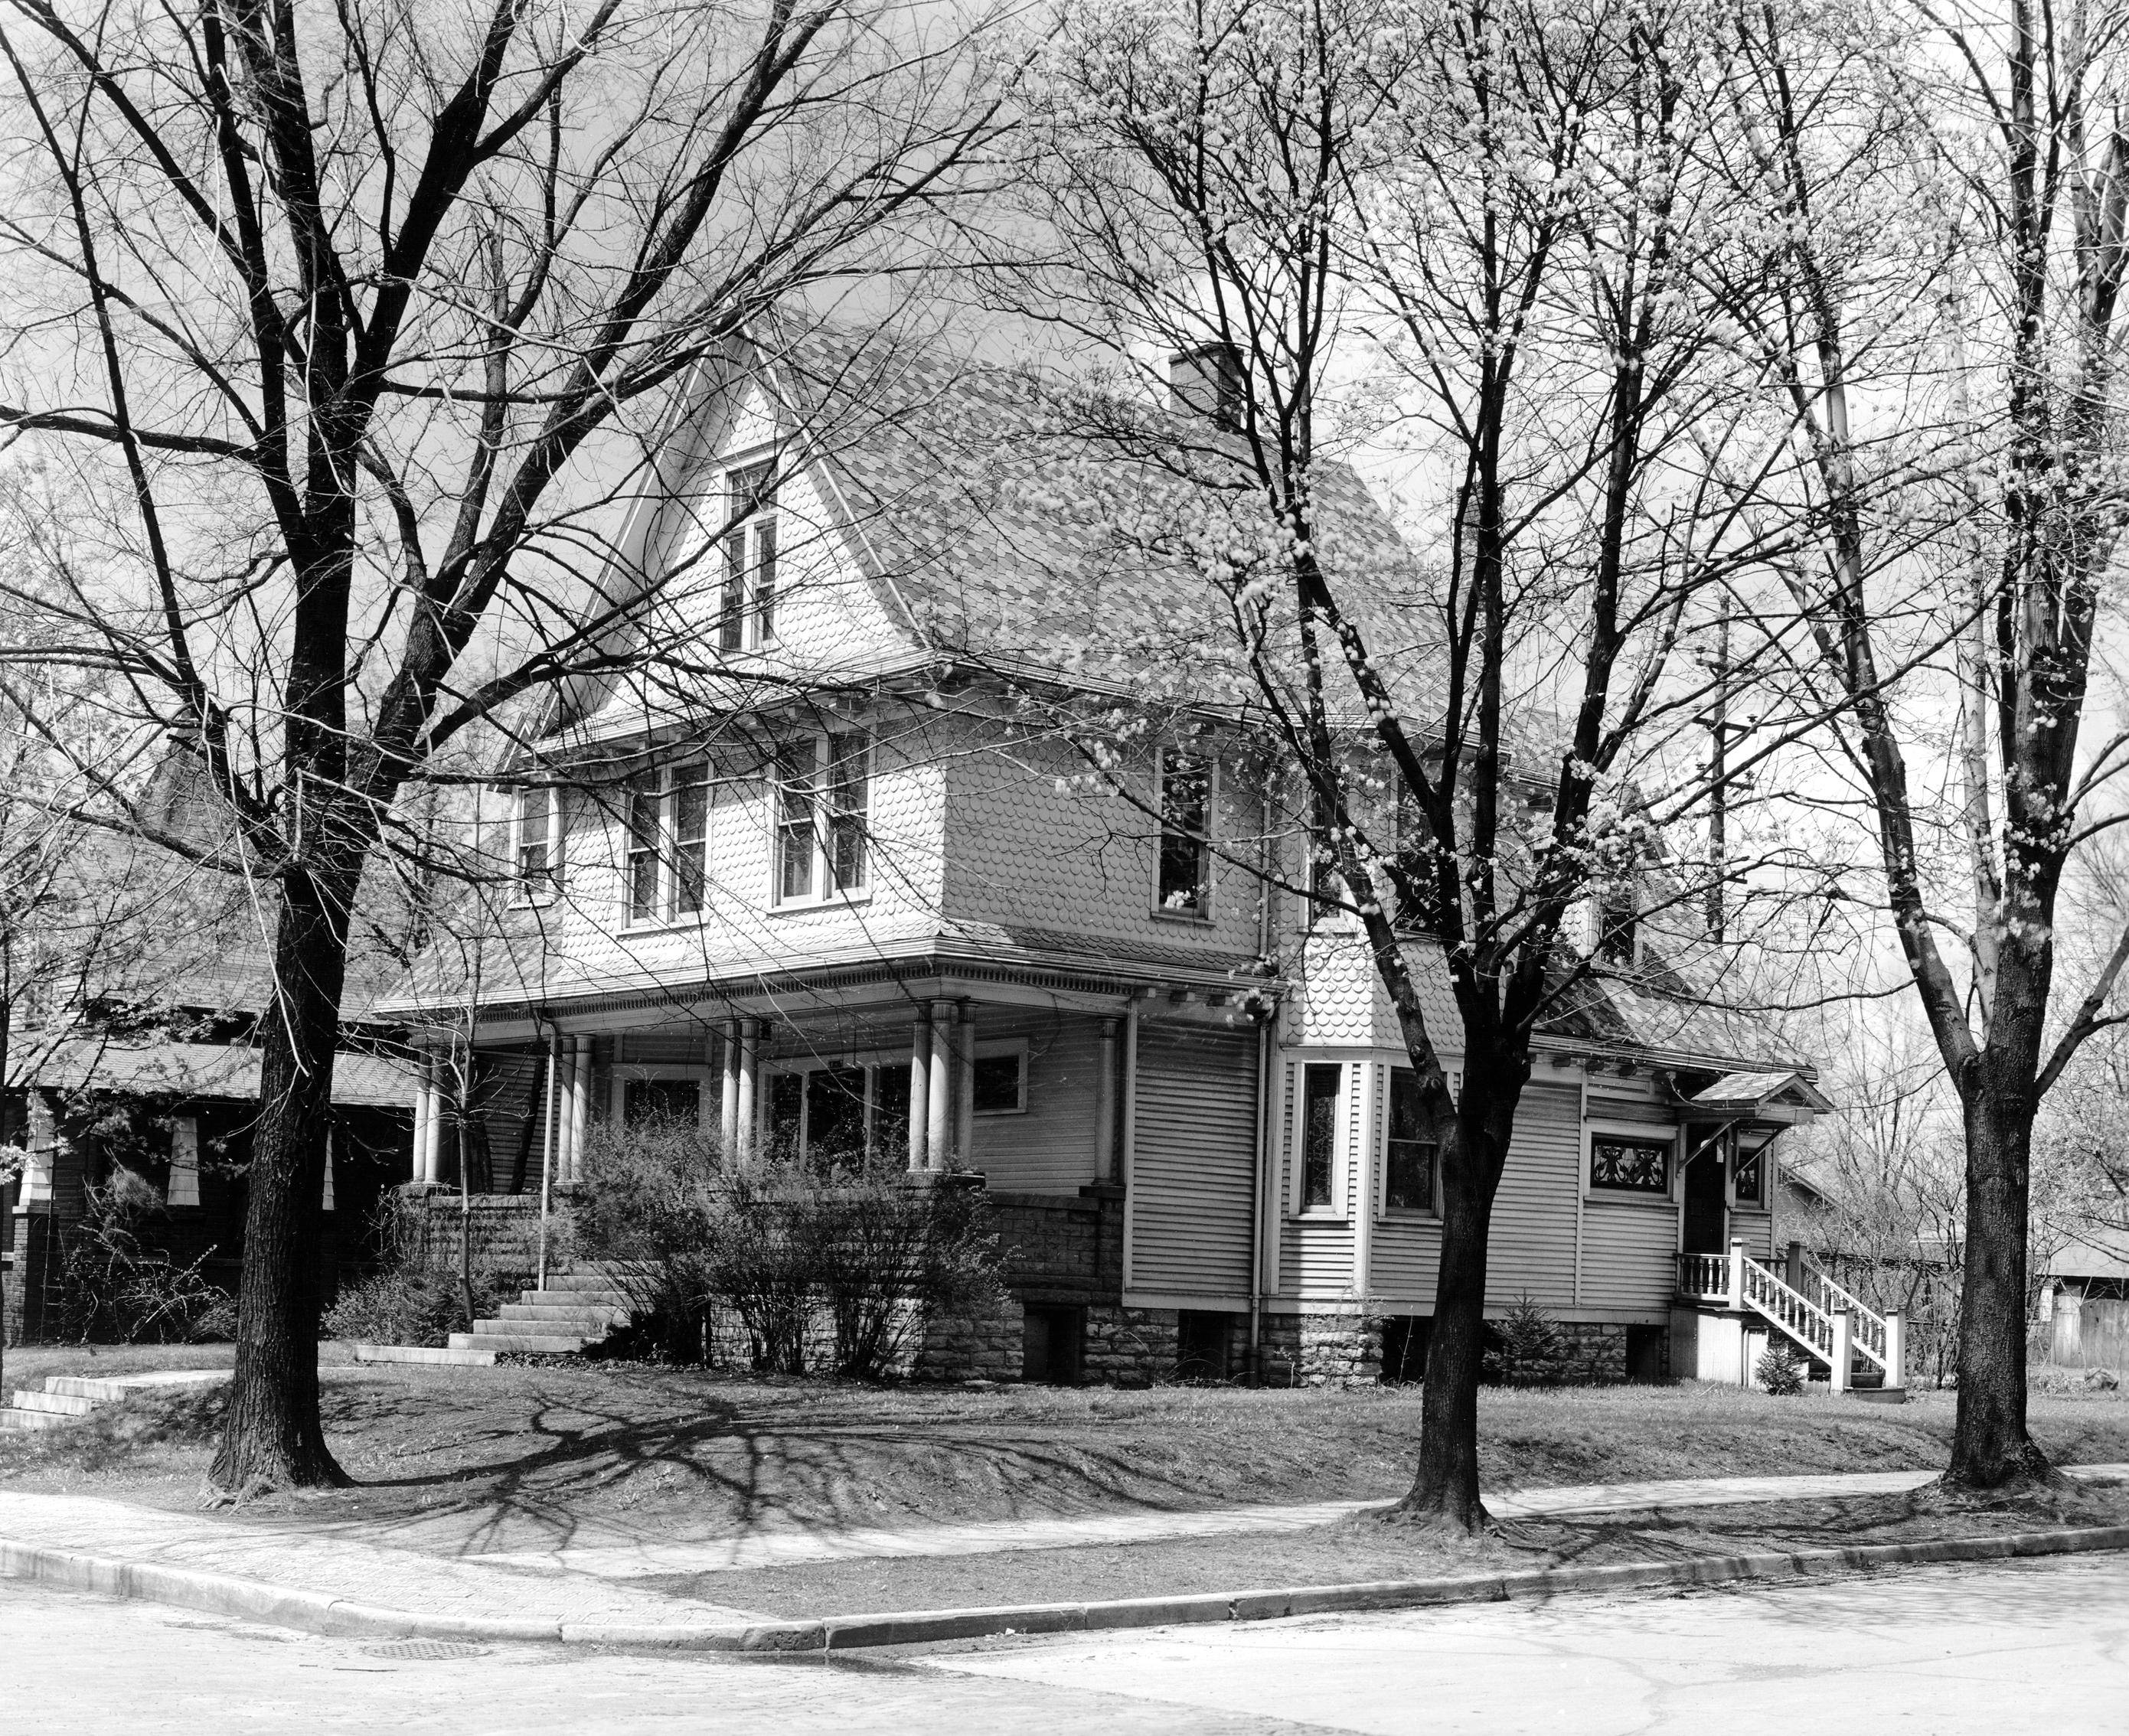 Wendell Willkie's childhood home in Elwood, Indiana. Image courtesy of Indiana Memory.